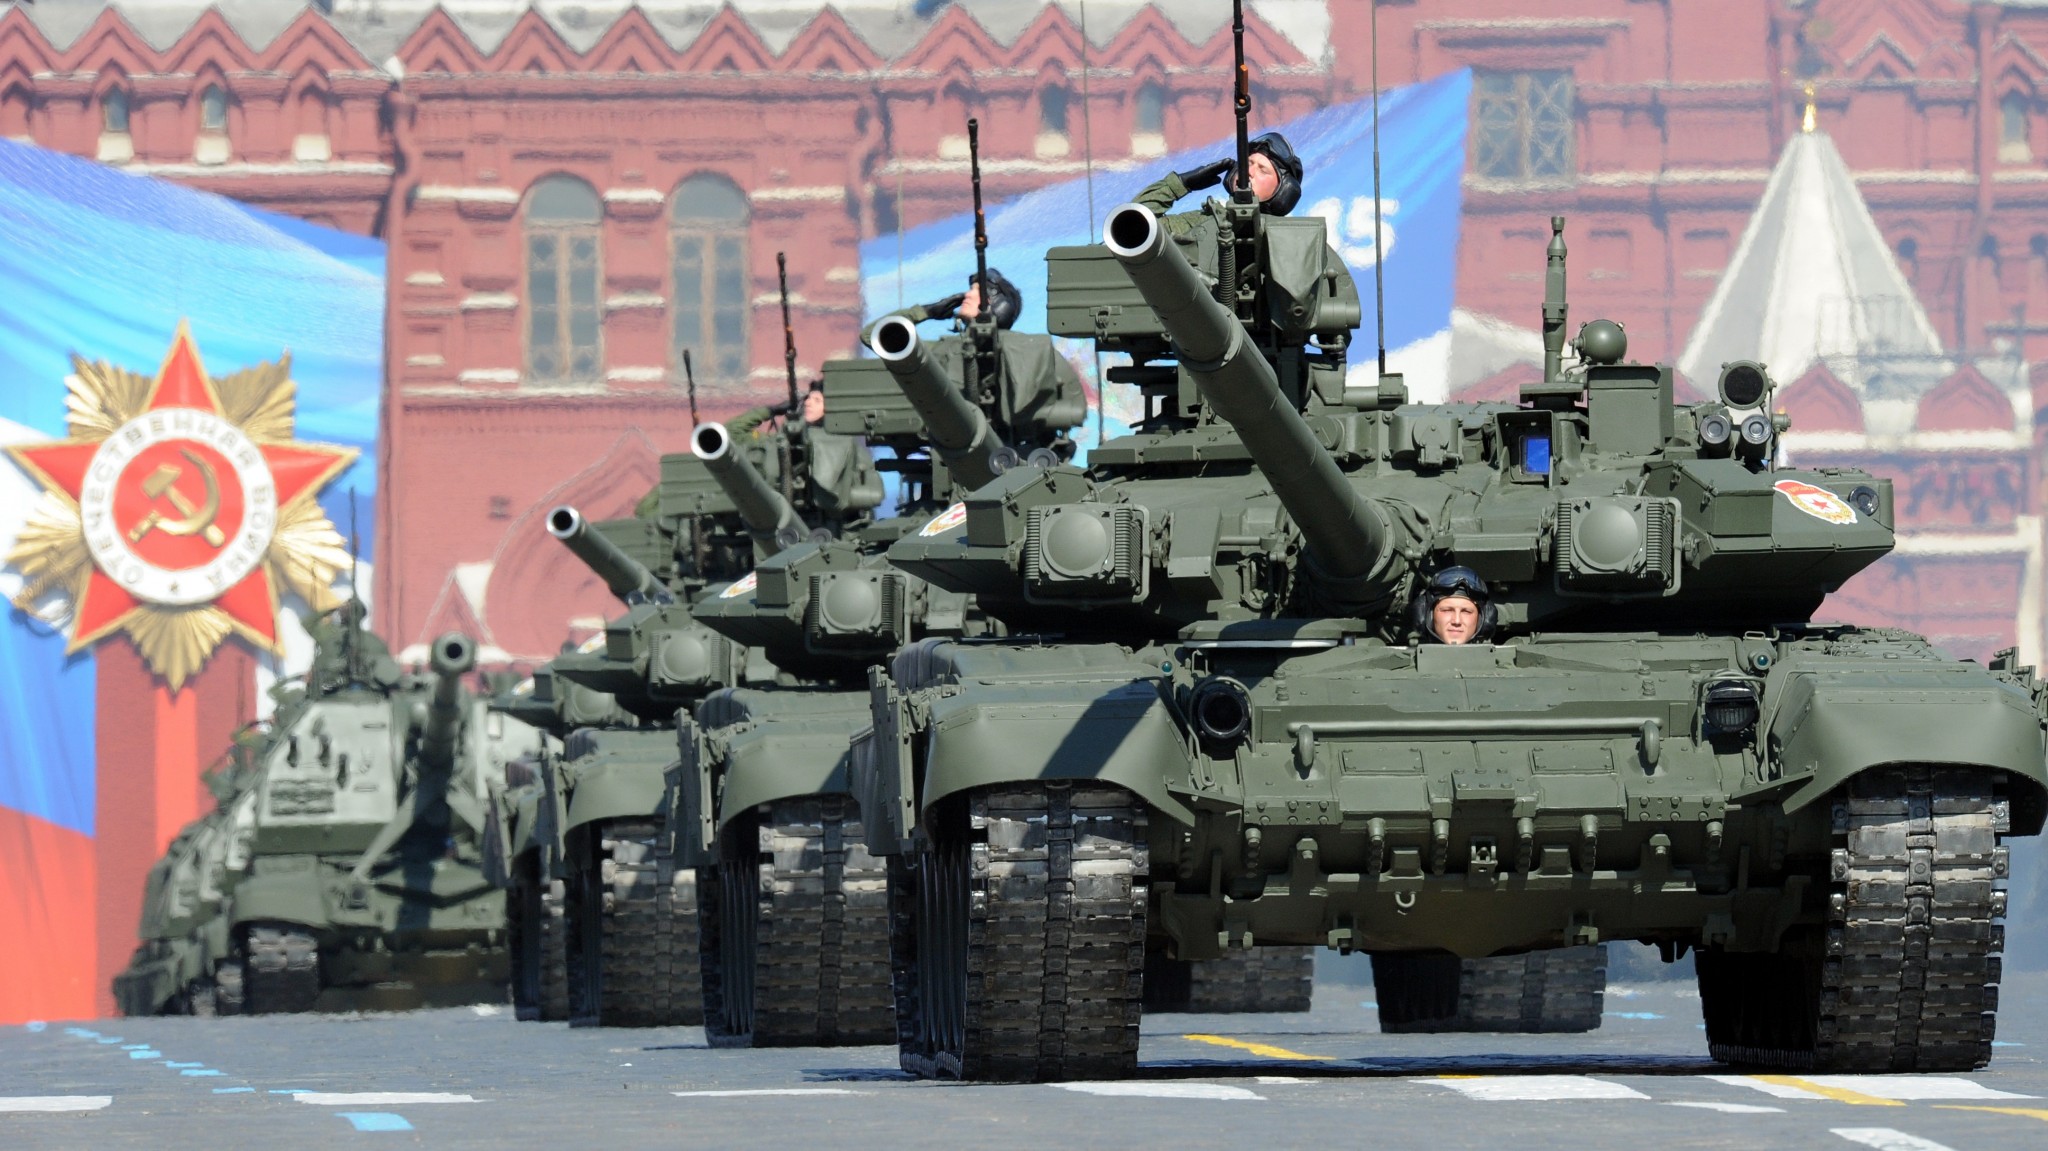 Moscow’s plans to cut military pensions seen driving military retirees to back opposition